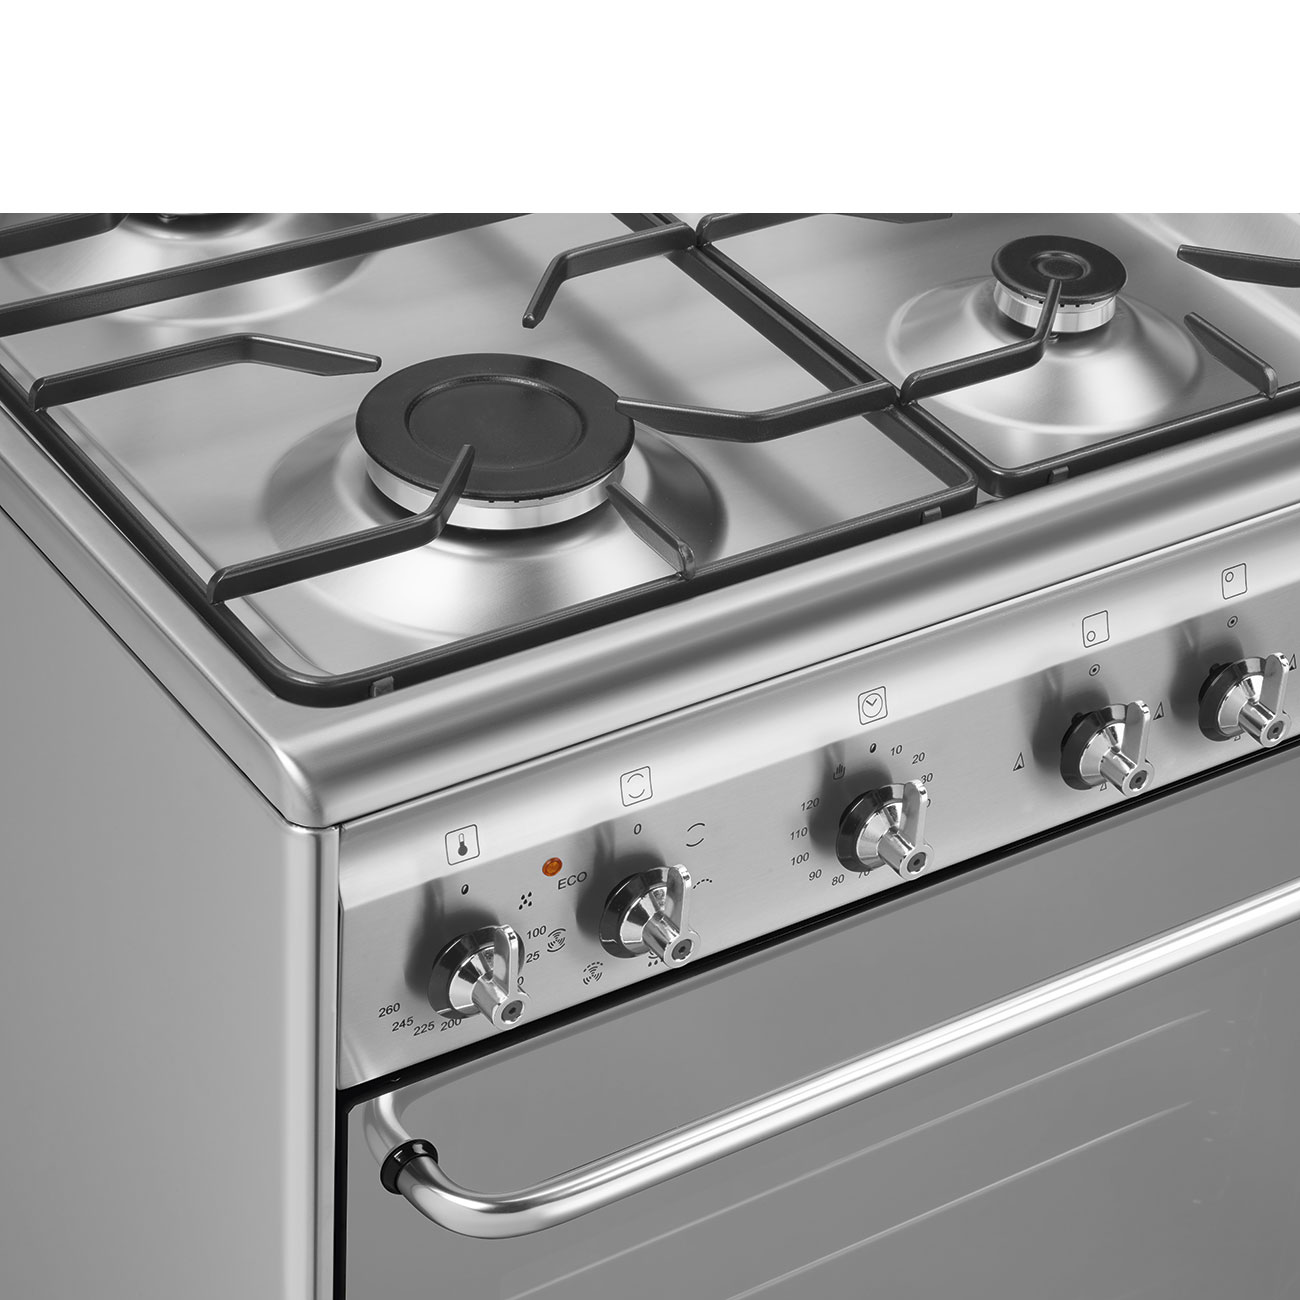 Smeg Stainless steel Cooker with Gas Hob_7